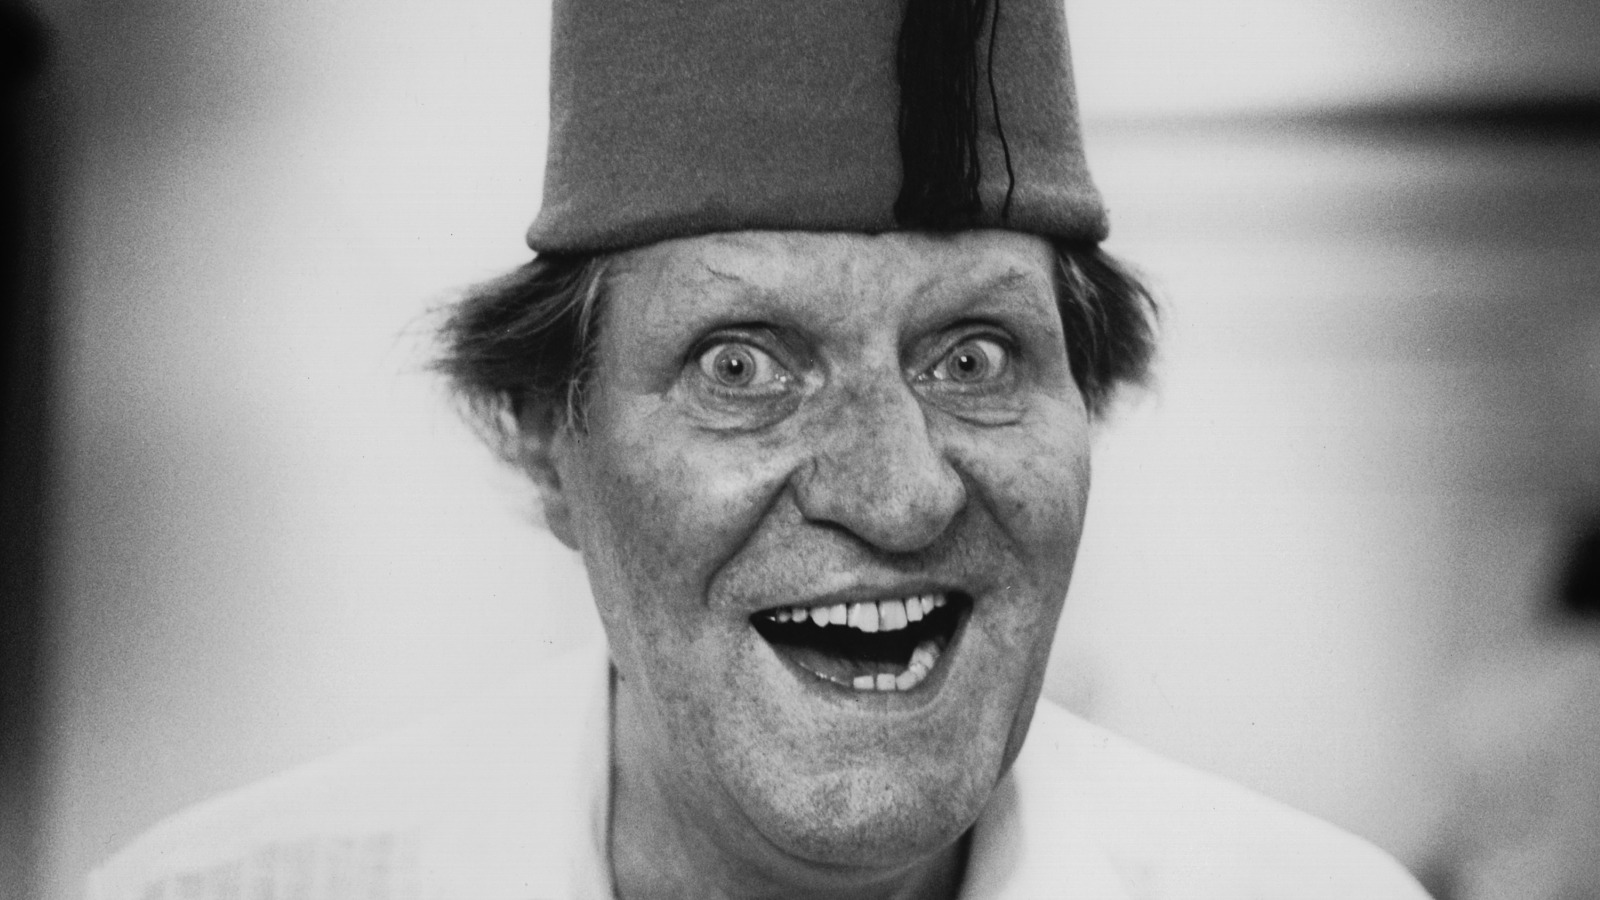 https://www.grunge.com/img/gallery/the-tragic-death-of-tommy-cooper/l-intro-1599937353.jpg